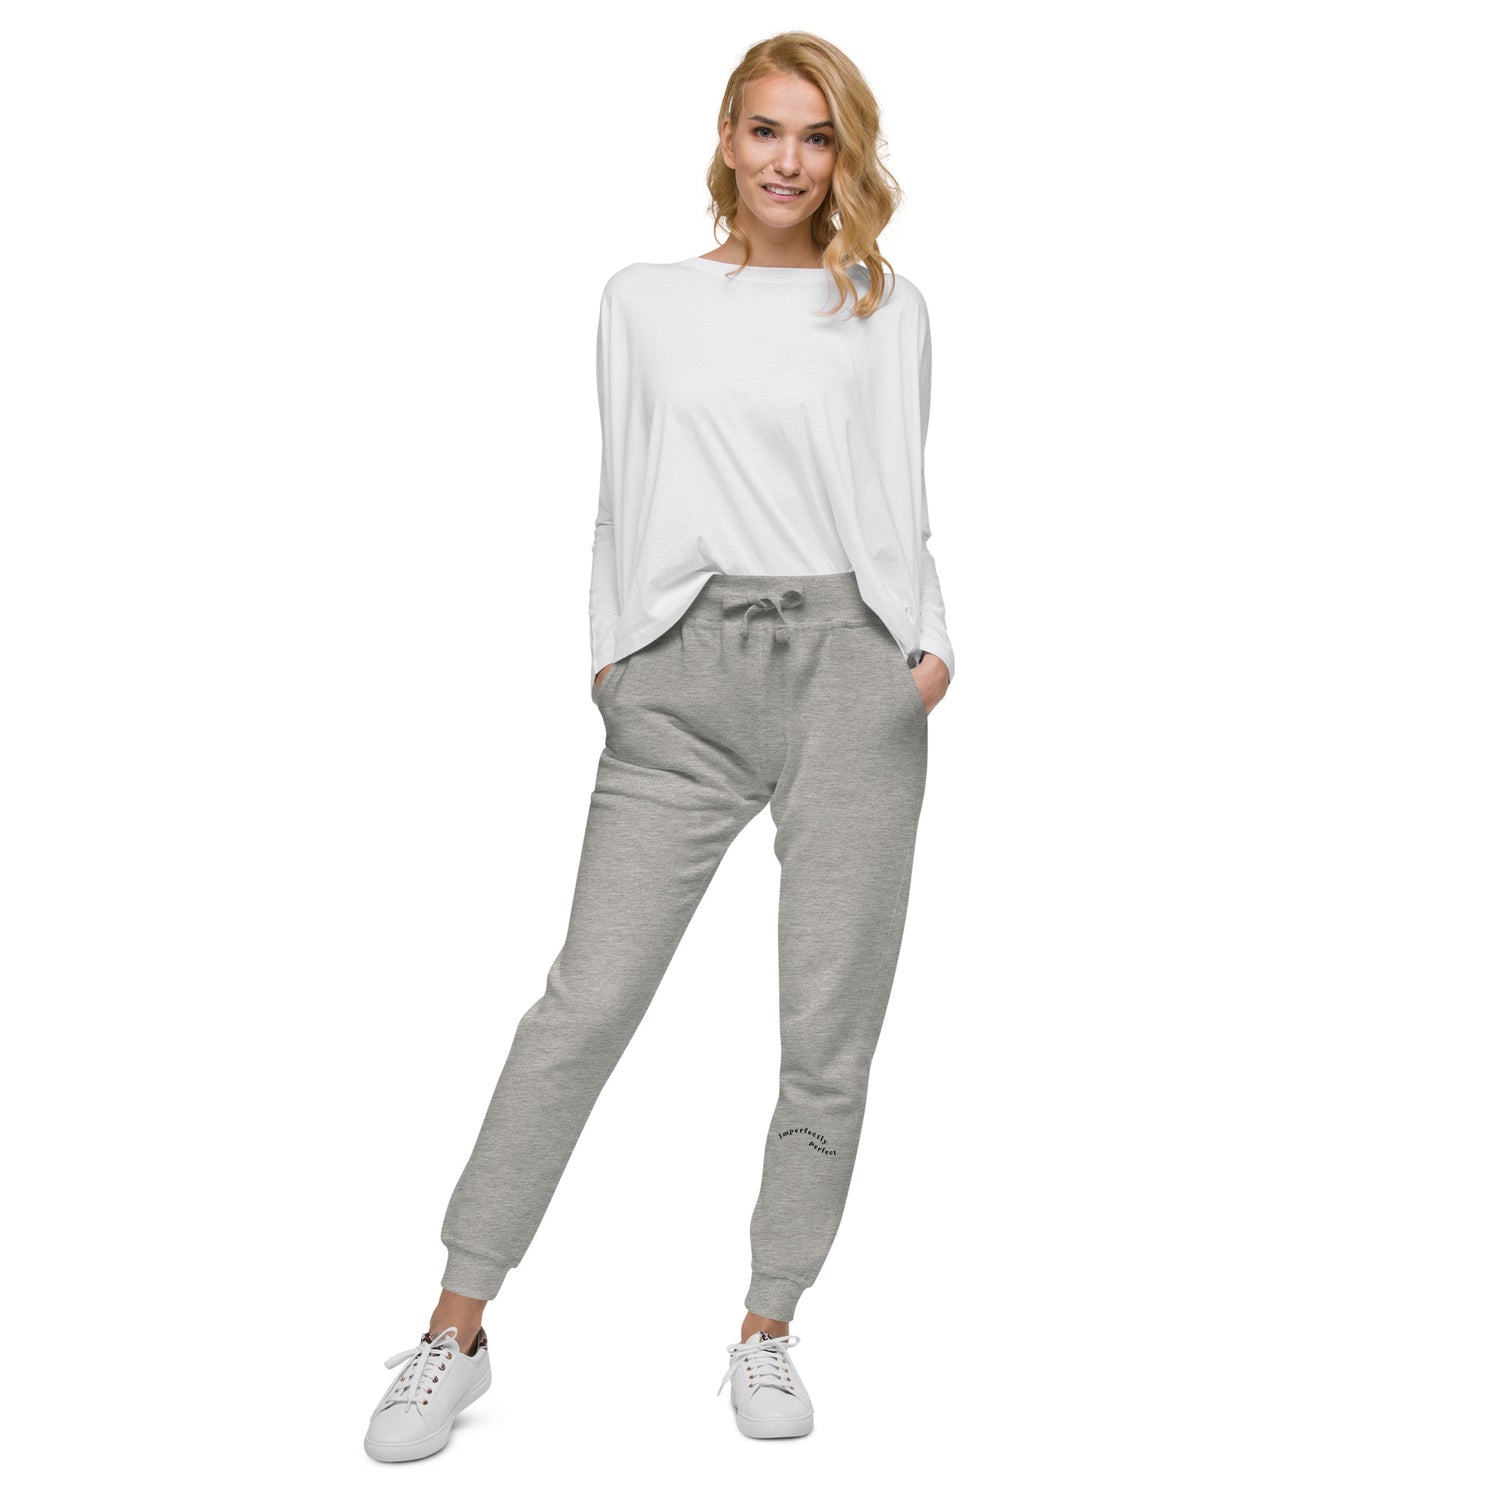 Grey sweat pant featuring "Imperfectly perfect" printed on left lower leg.